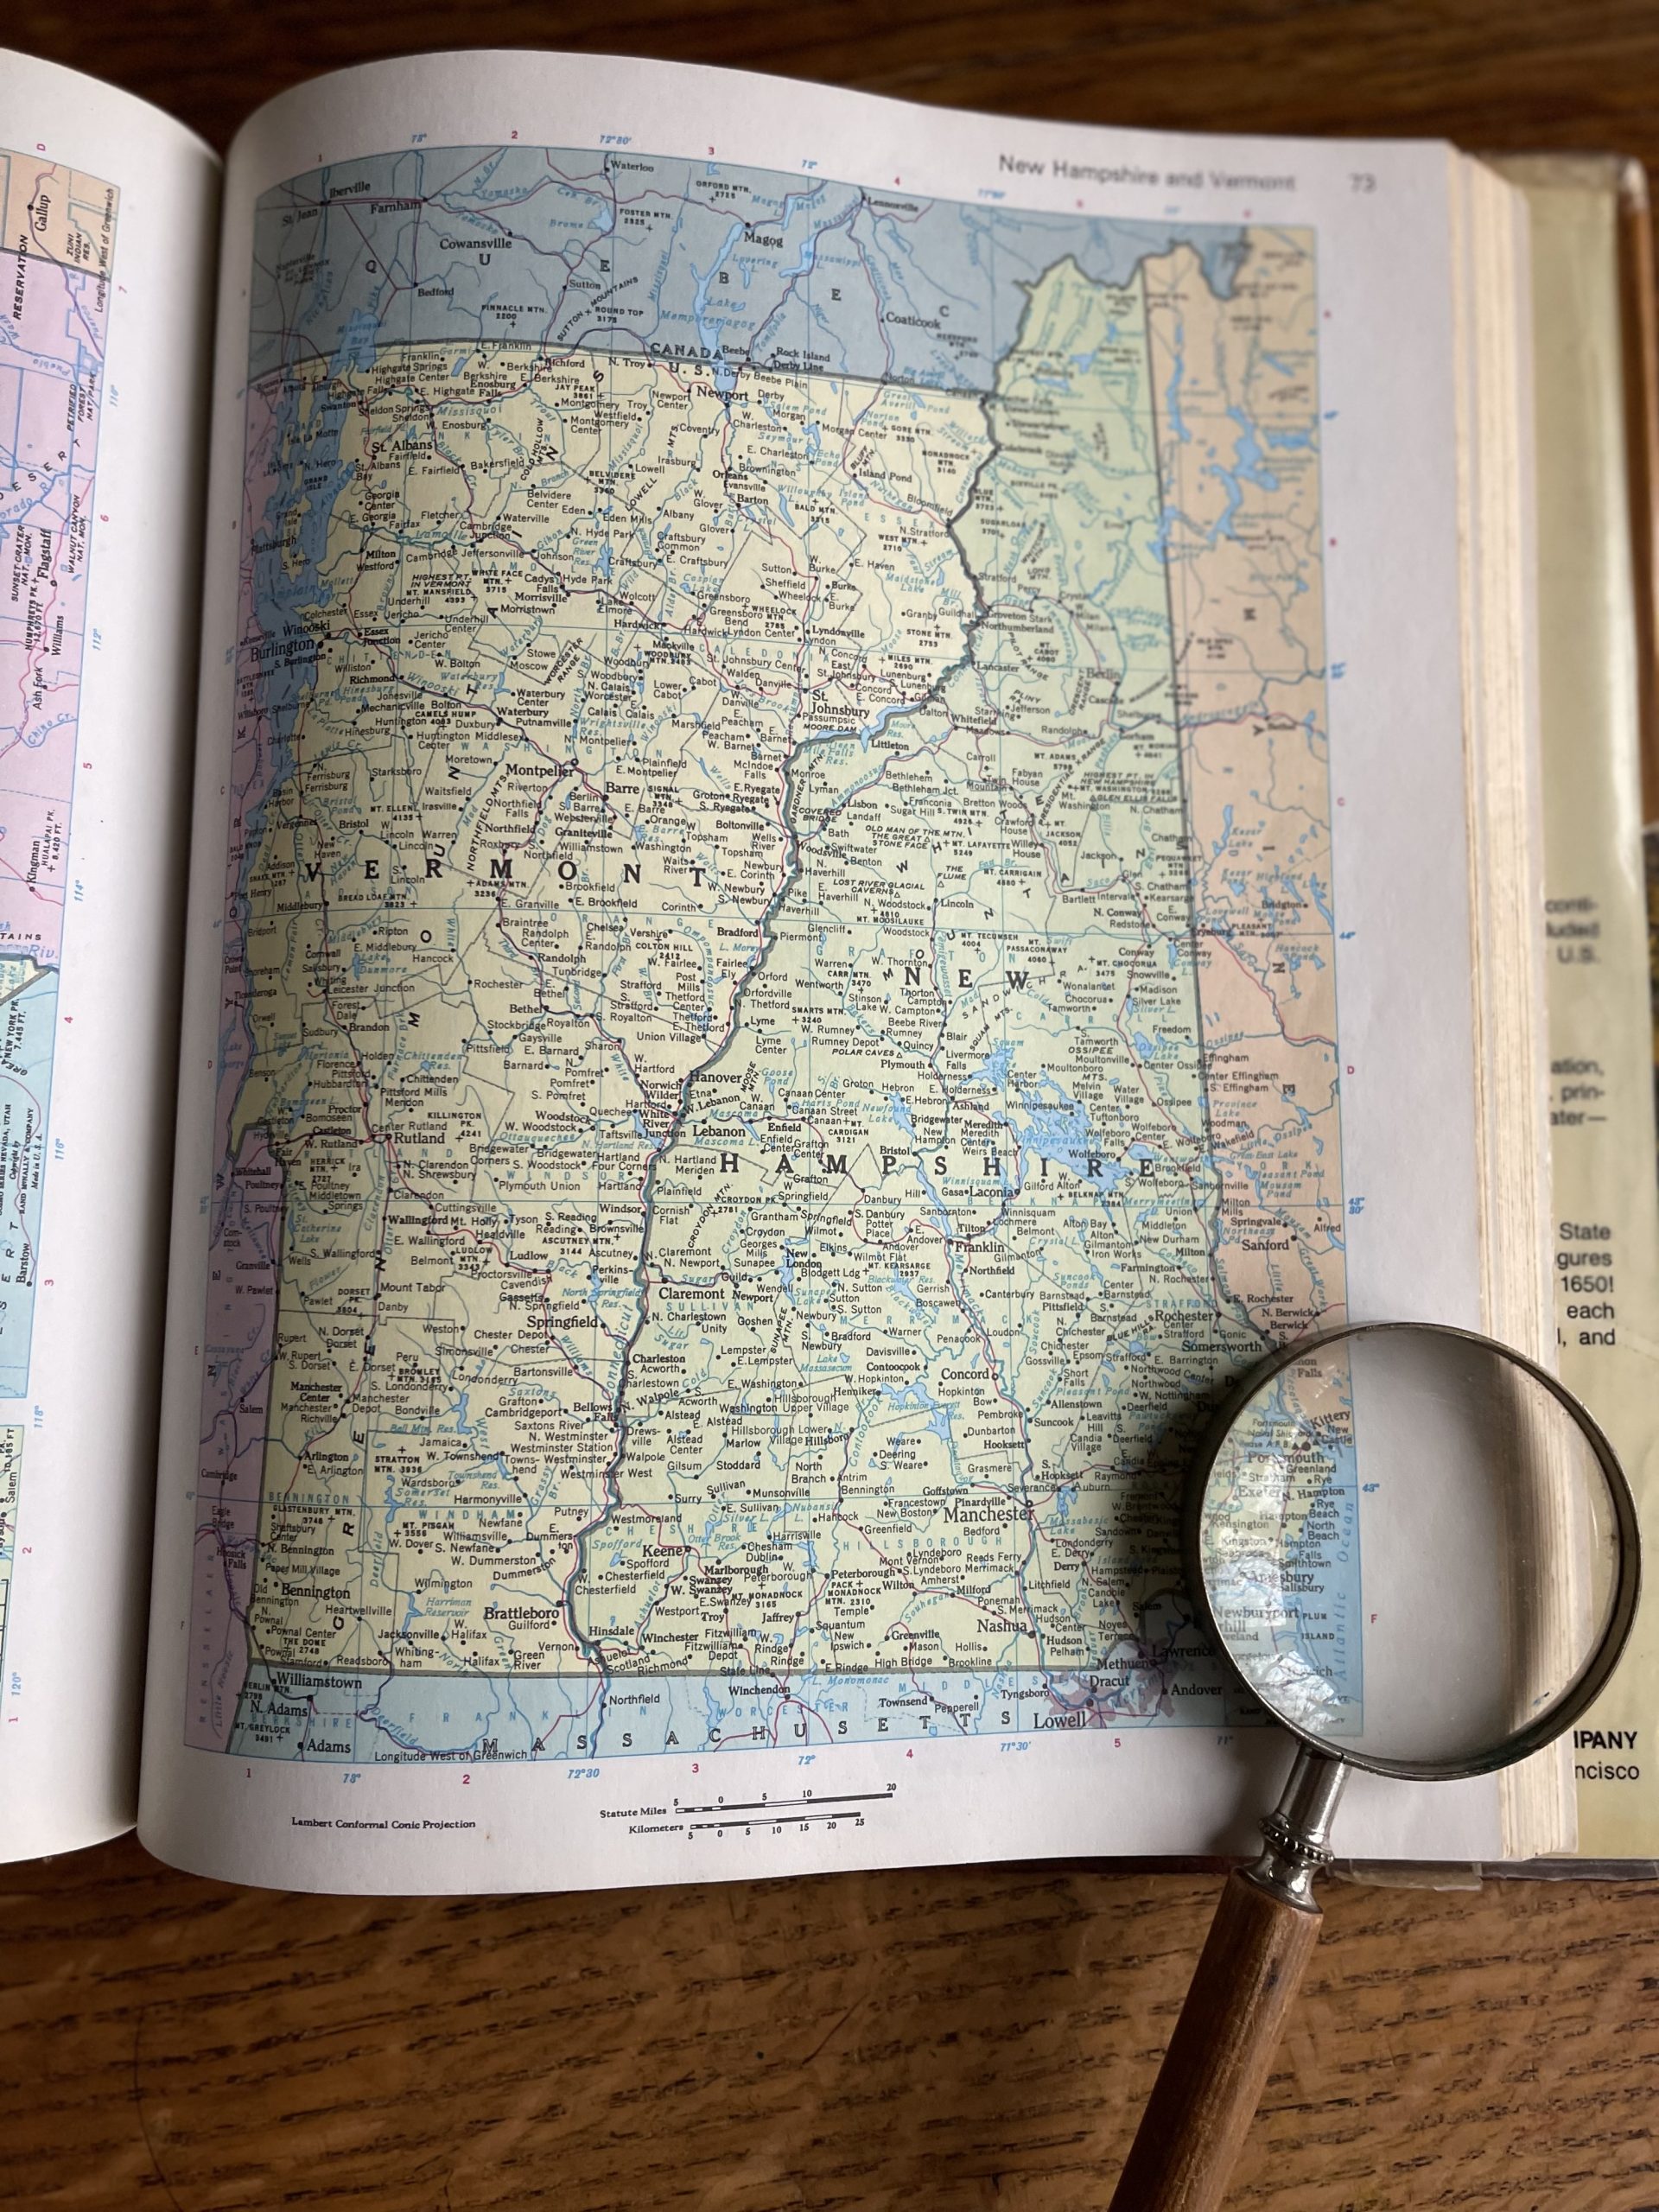 VT NH Map with magnifying glass